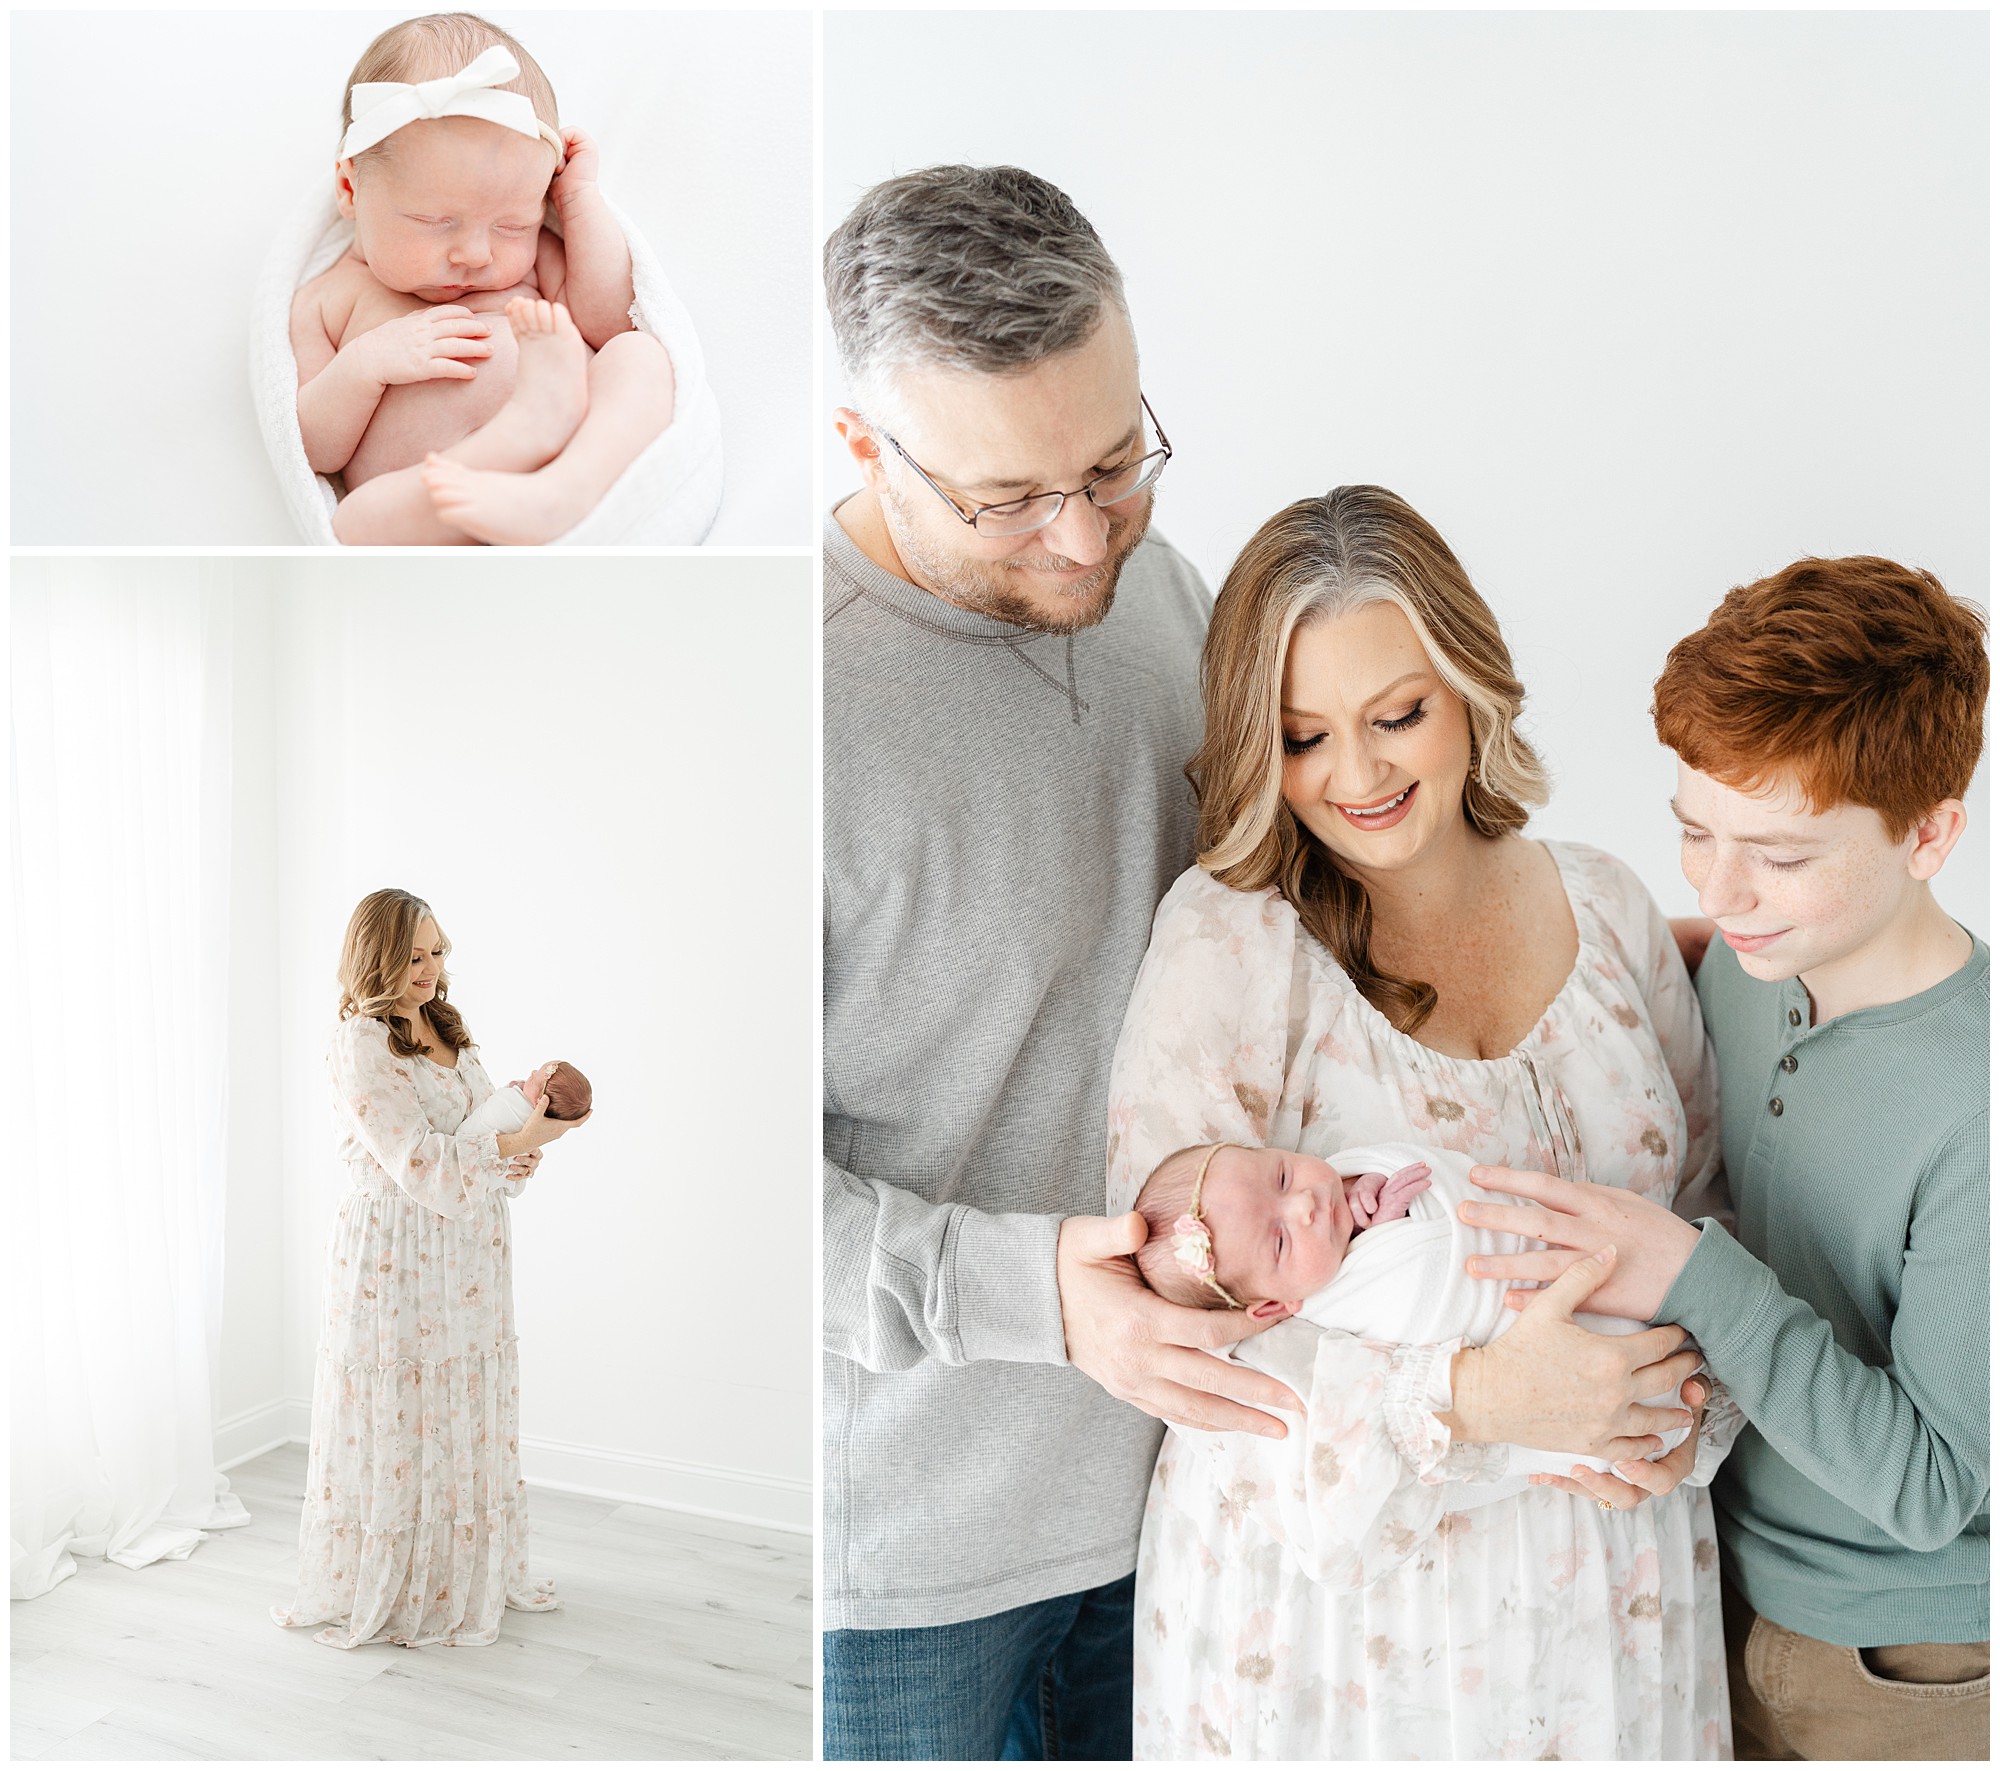 Portraits of parents with their son and newborn daughter in an Atlanta newborn photography studio.